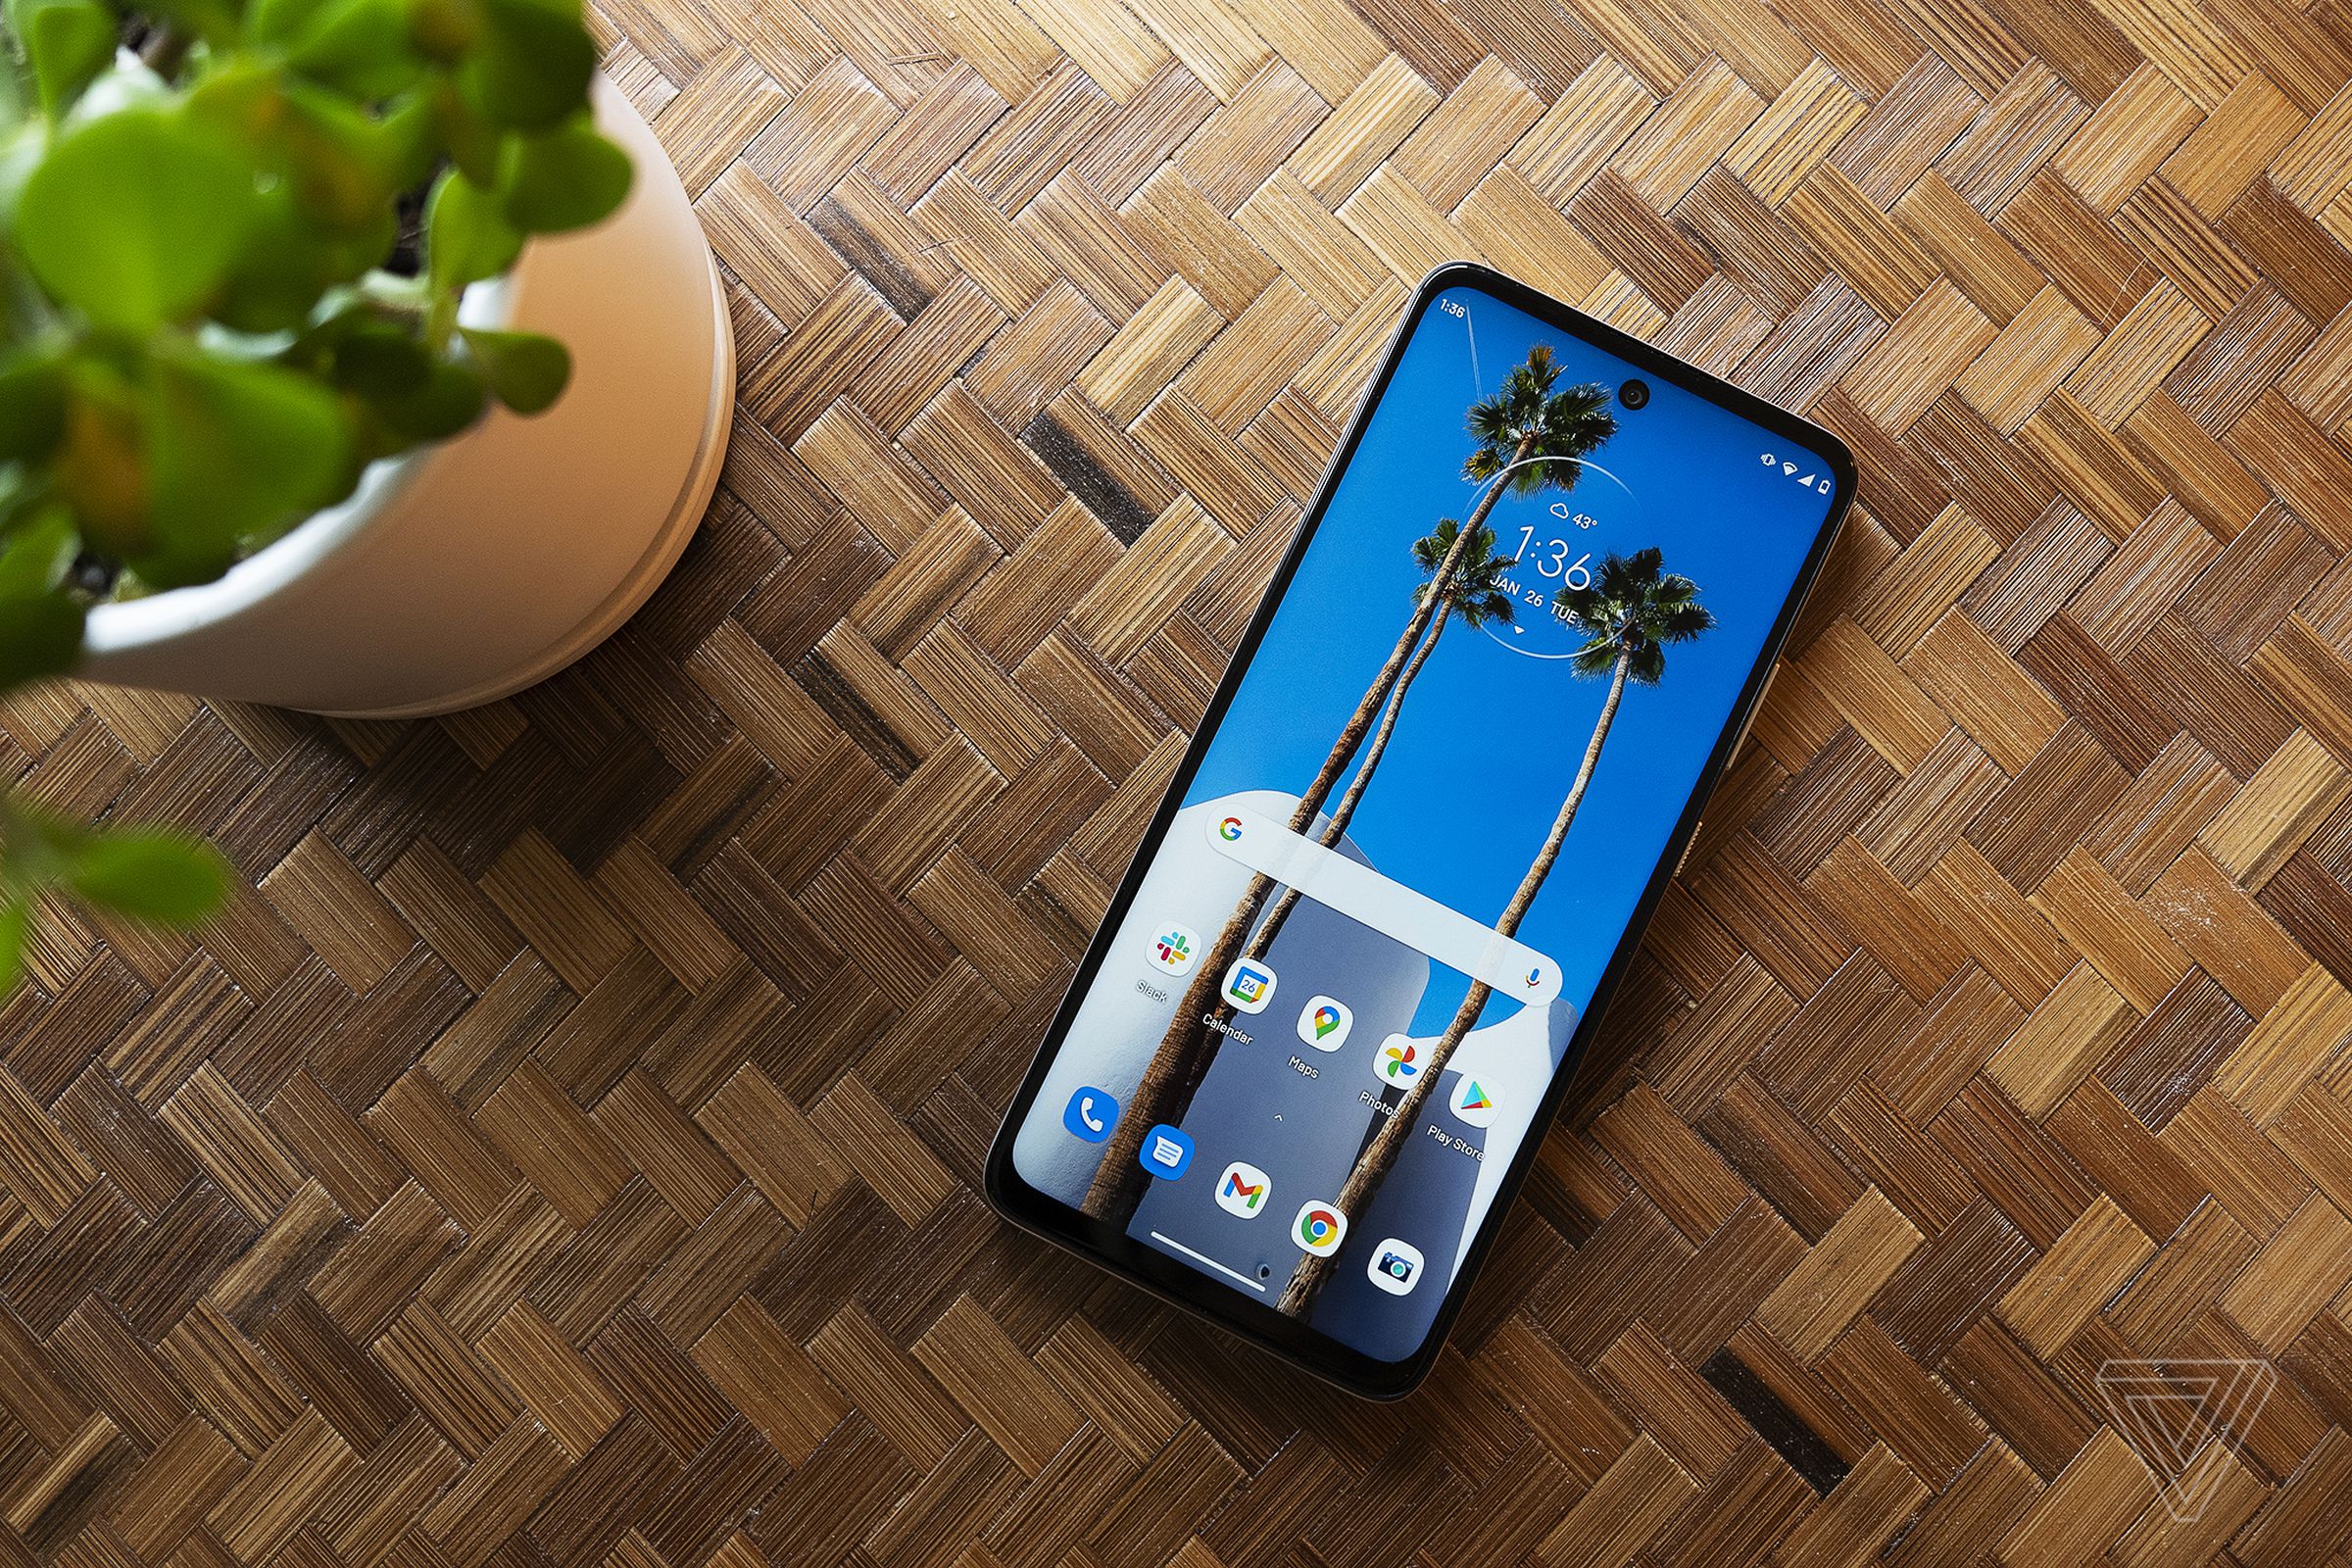 The Ace doesn’t have a lot of direct competition as a $400 phone with 5G, but that will change soon.